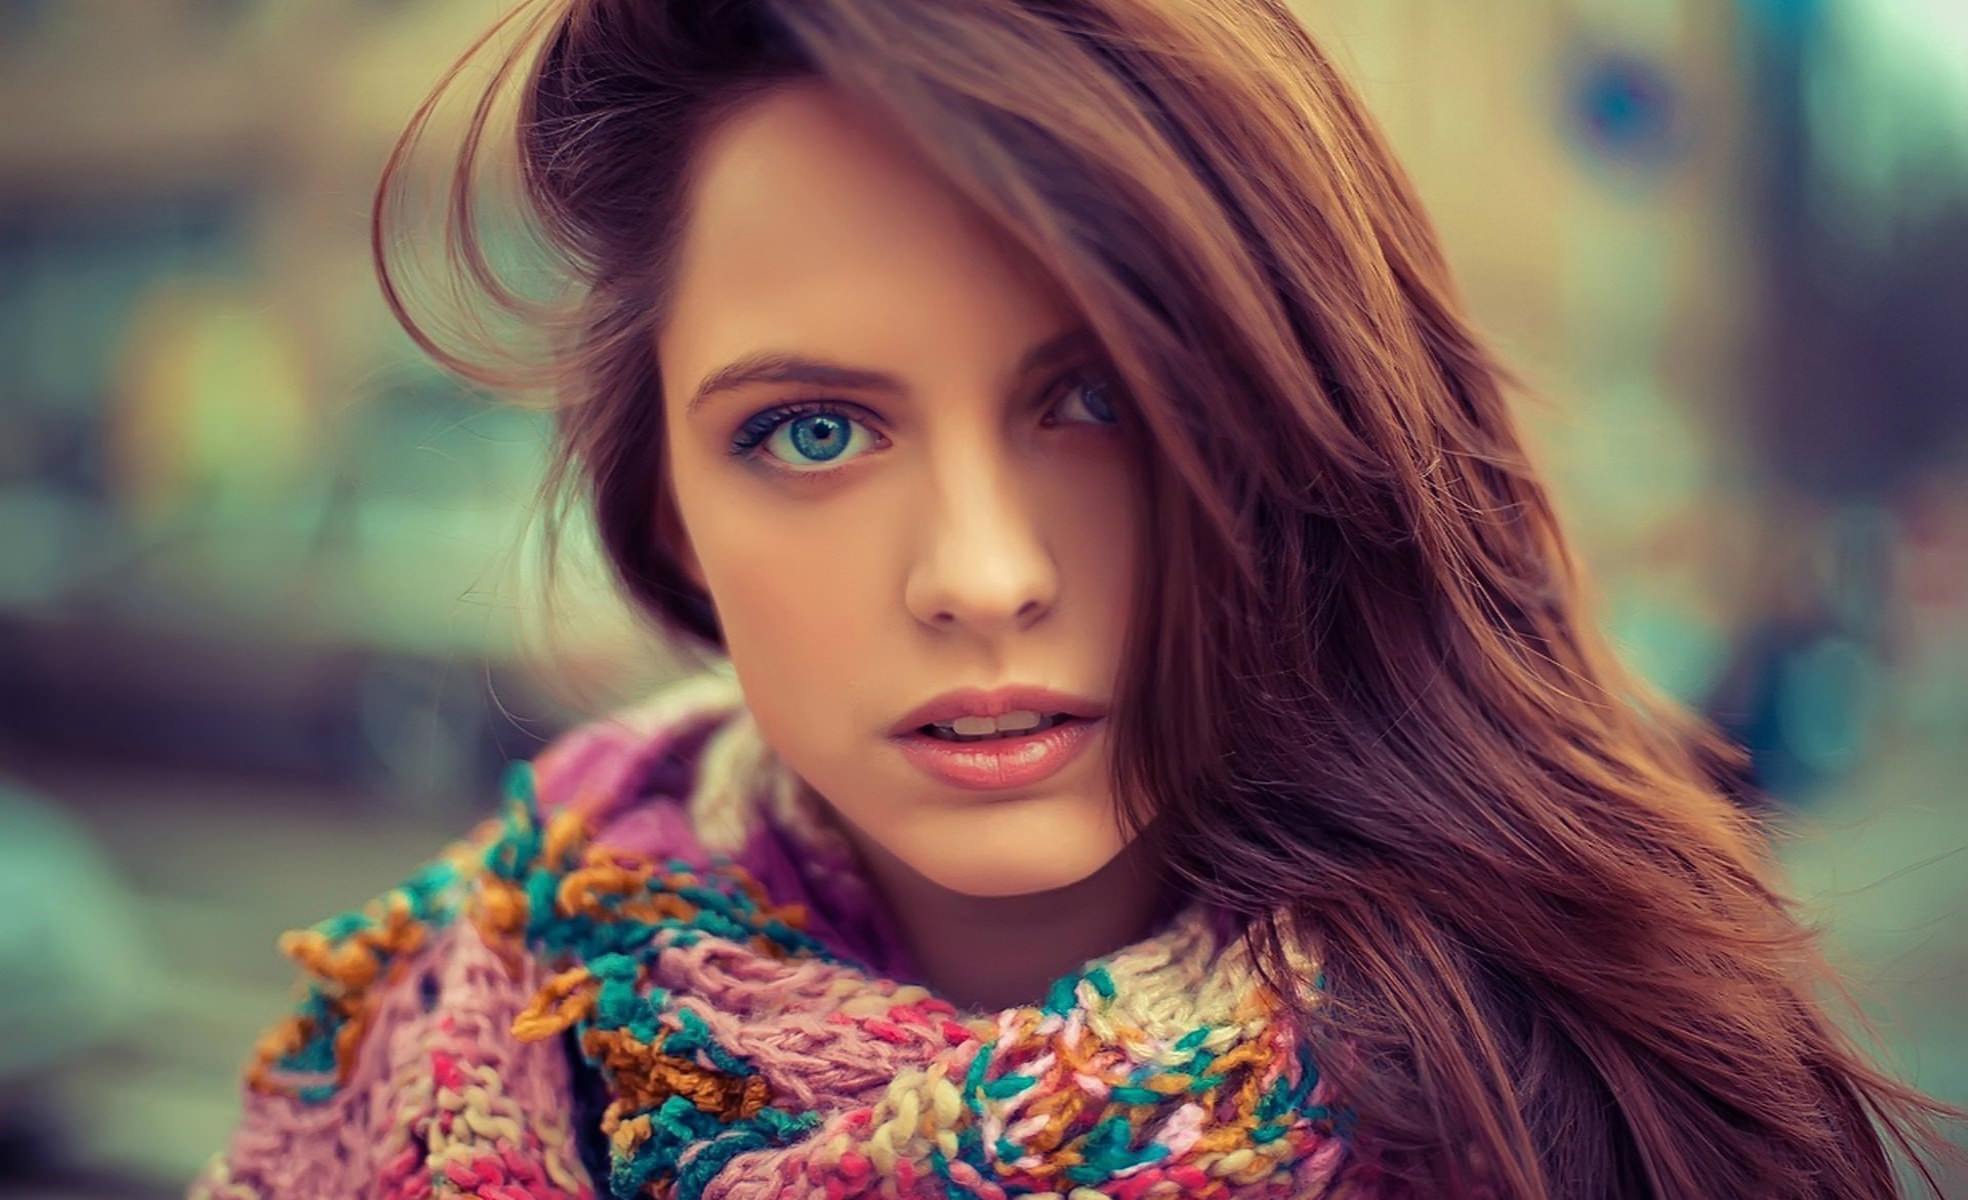 Pretty Girl with Blue Eyes Wallpaper